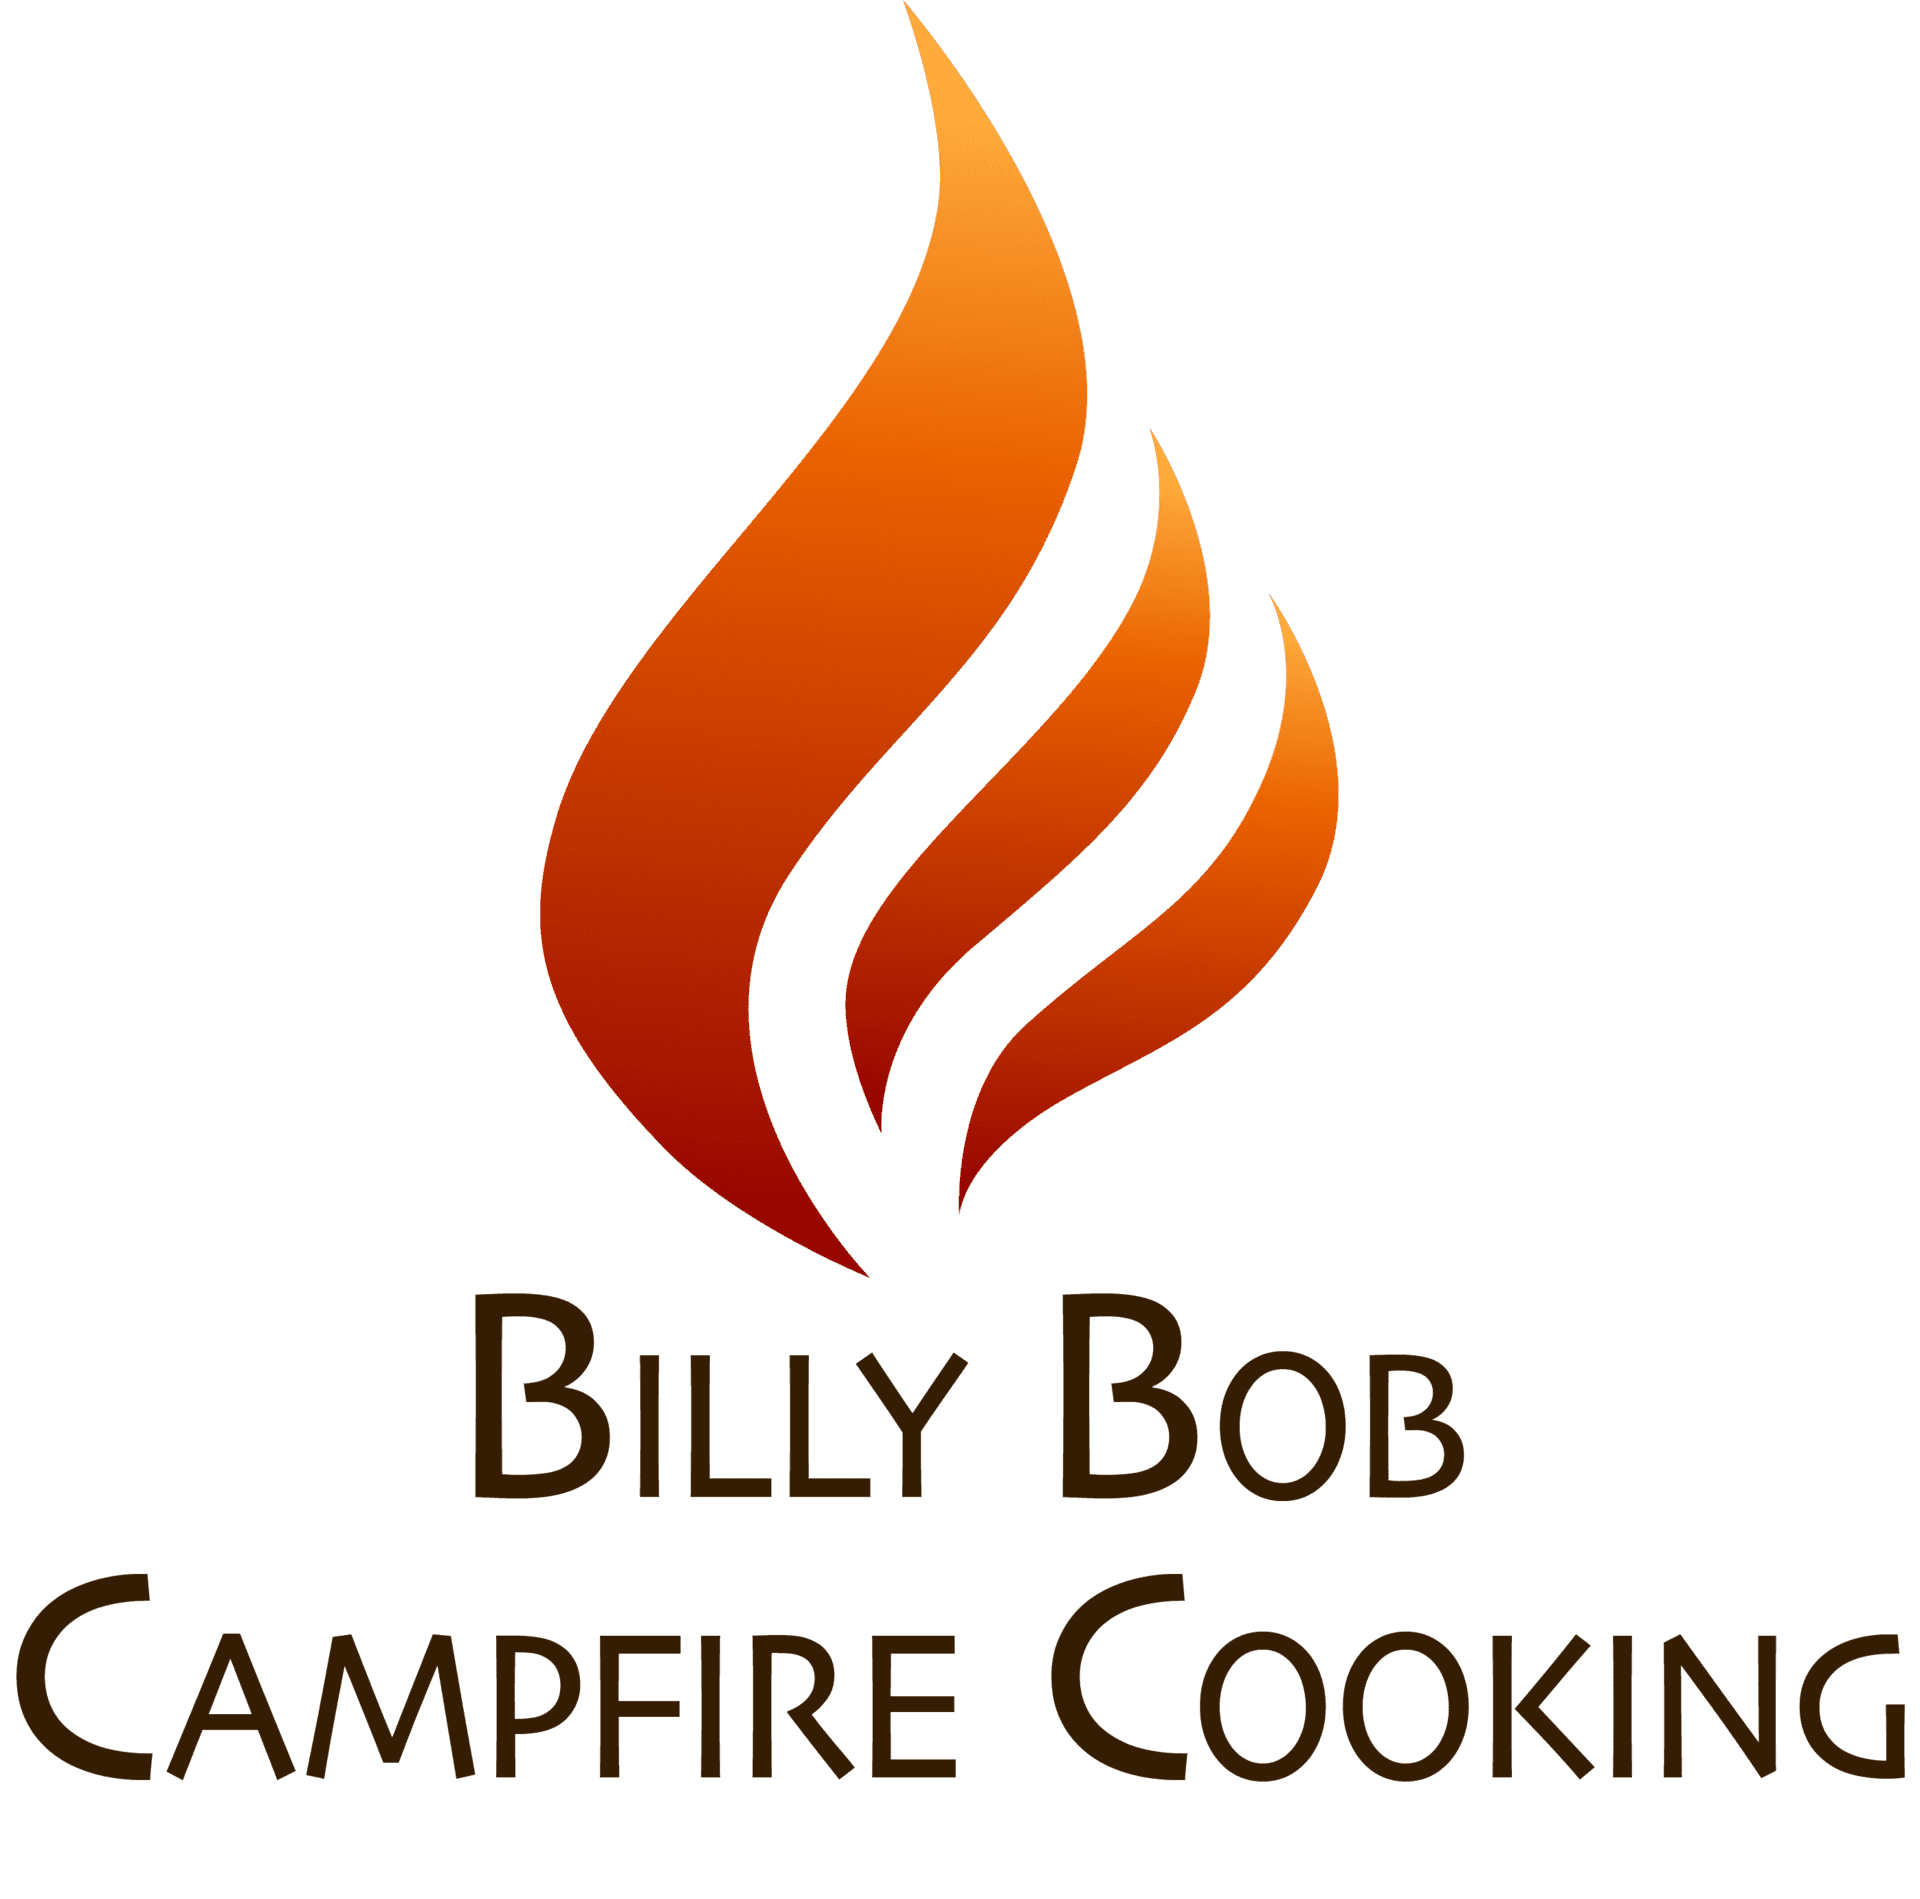 Cooking.com Logo - Billy Bob Campfire Cooking - Handcrafted Grill Sets